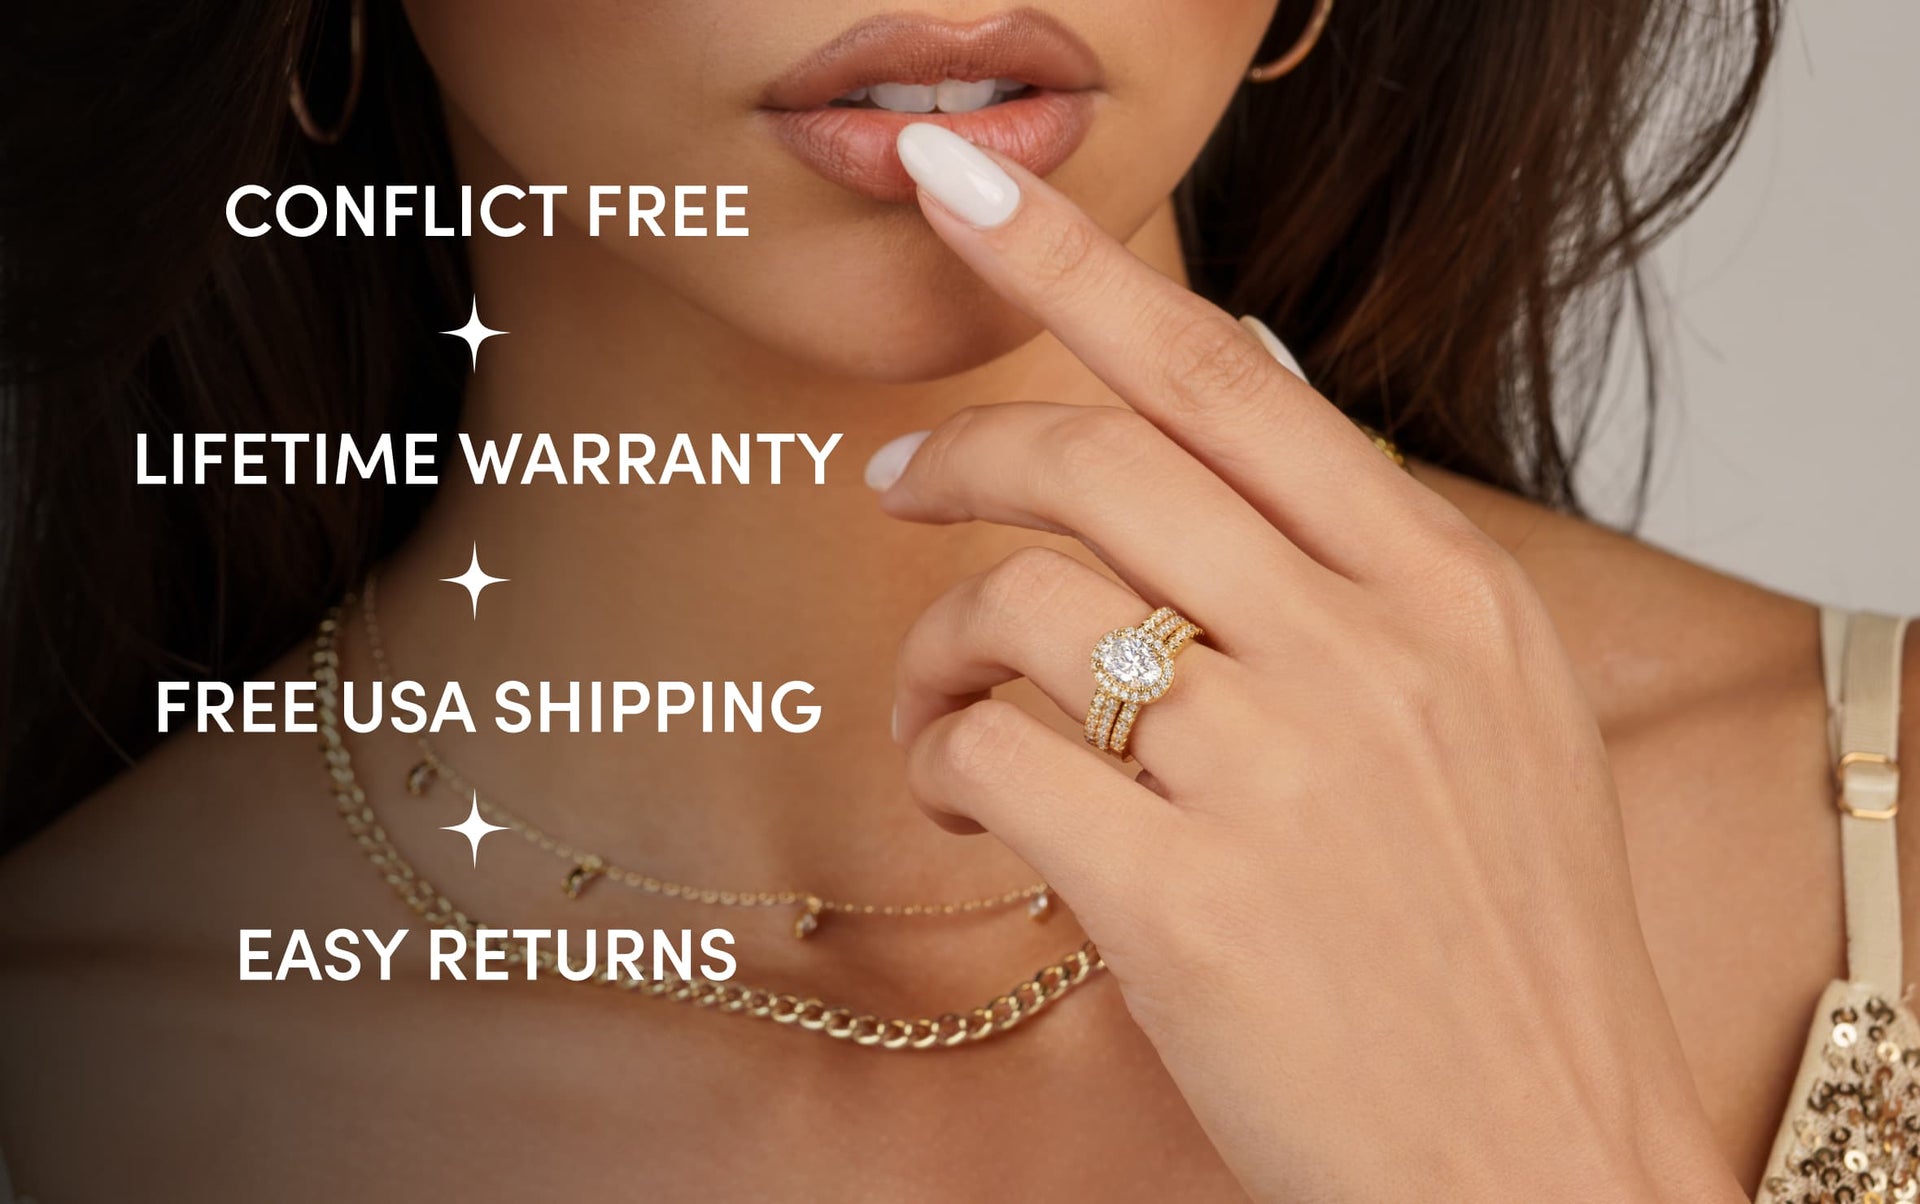 woman wearing gold oval cut engagement ring with conflict free lifetime warranty free usa shipping easy returns